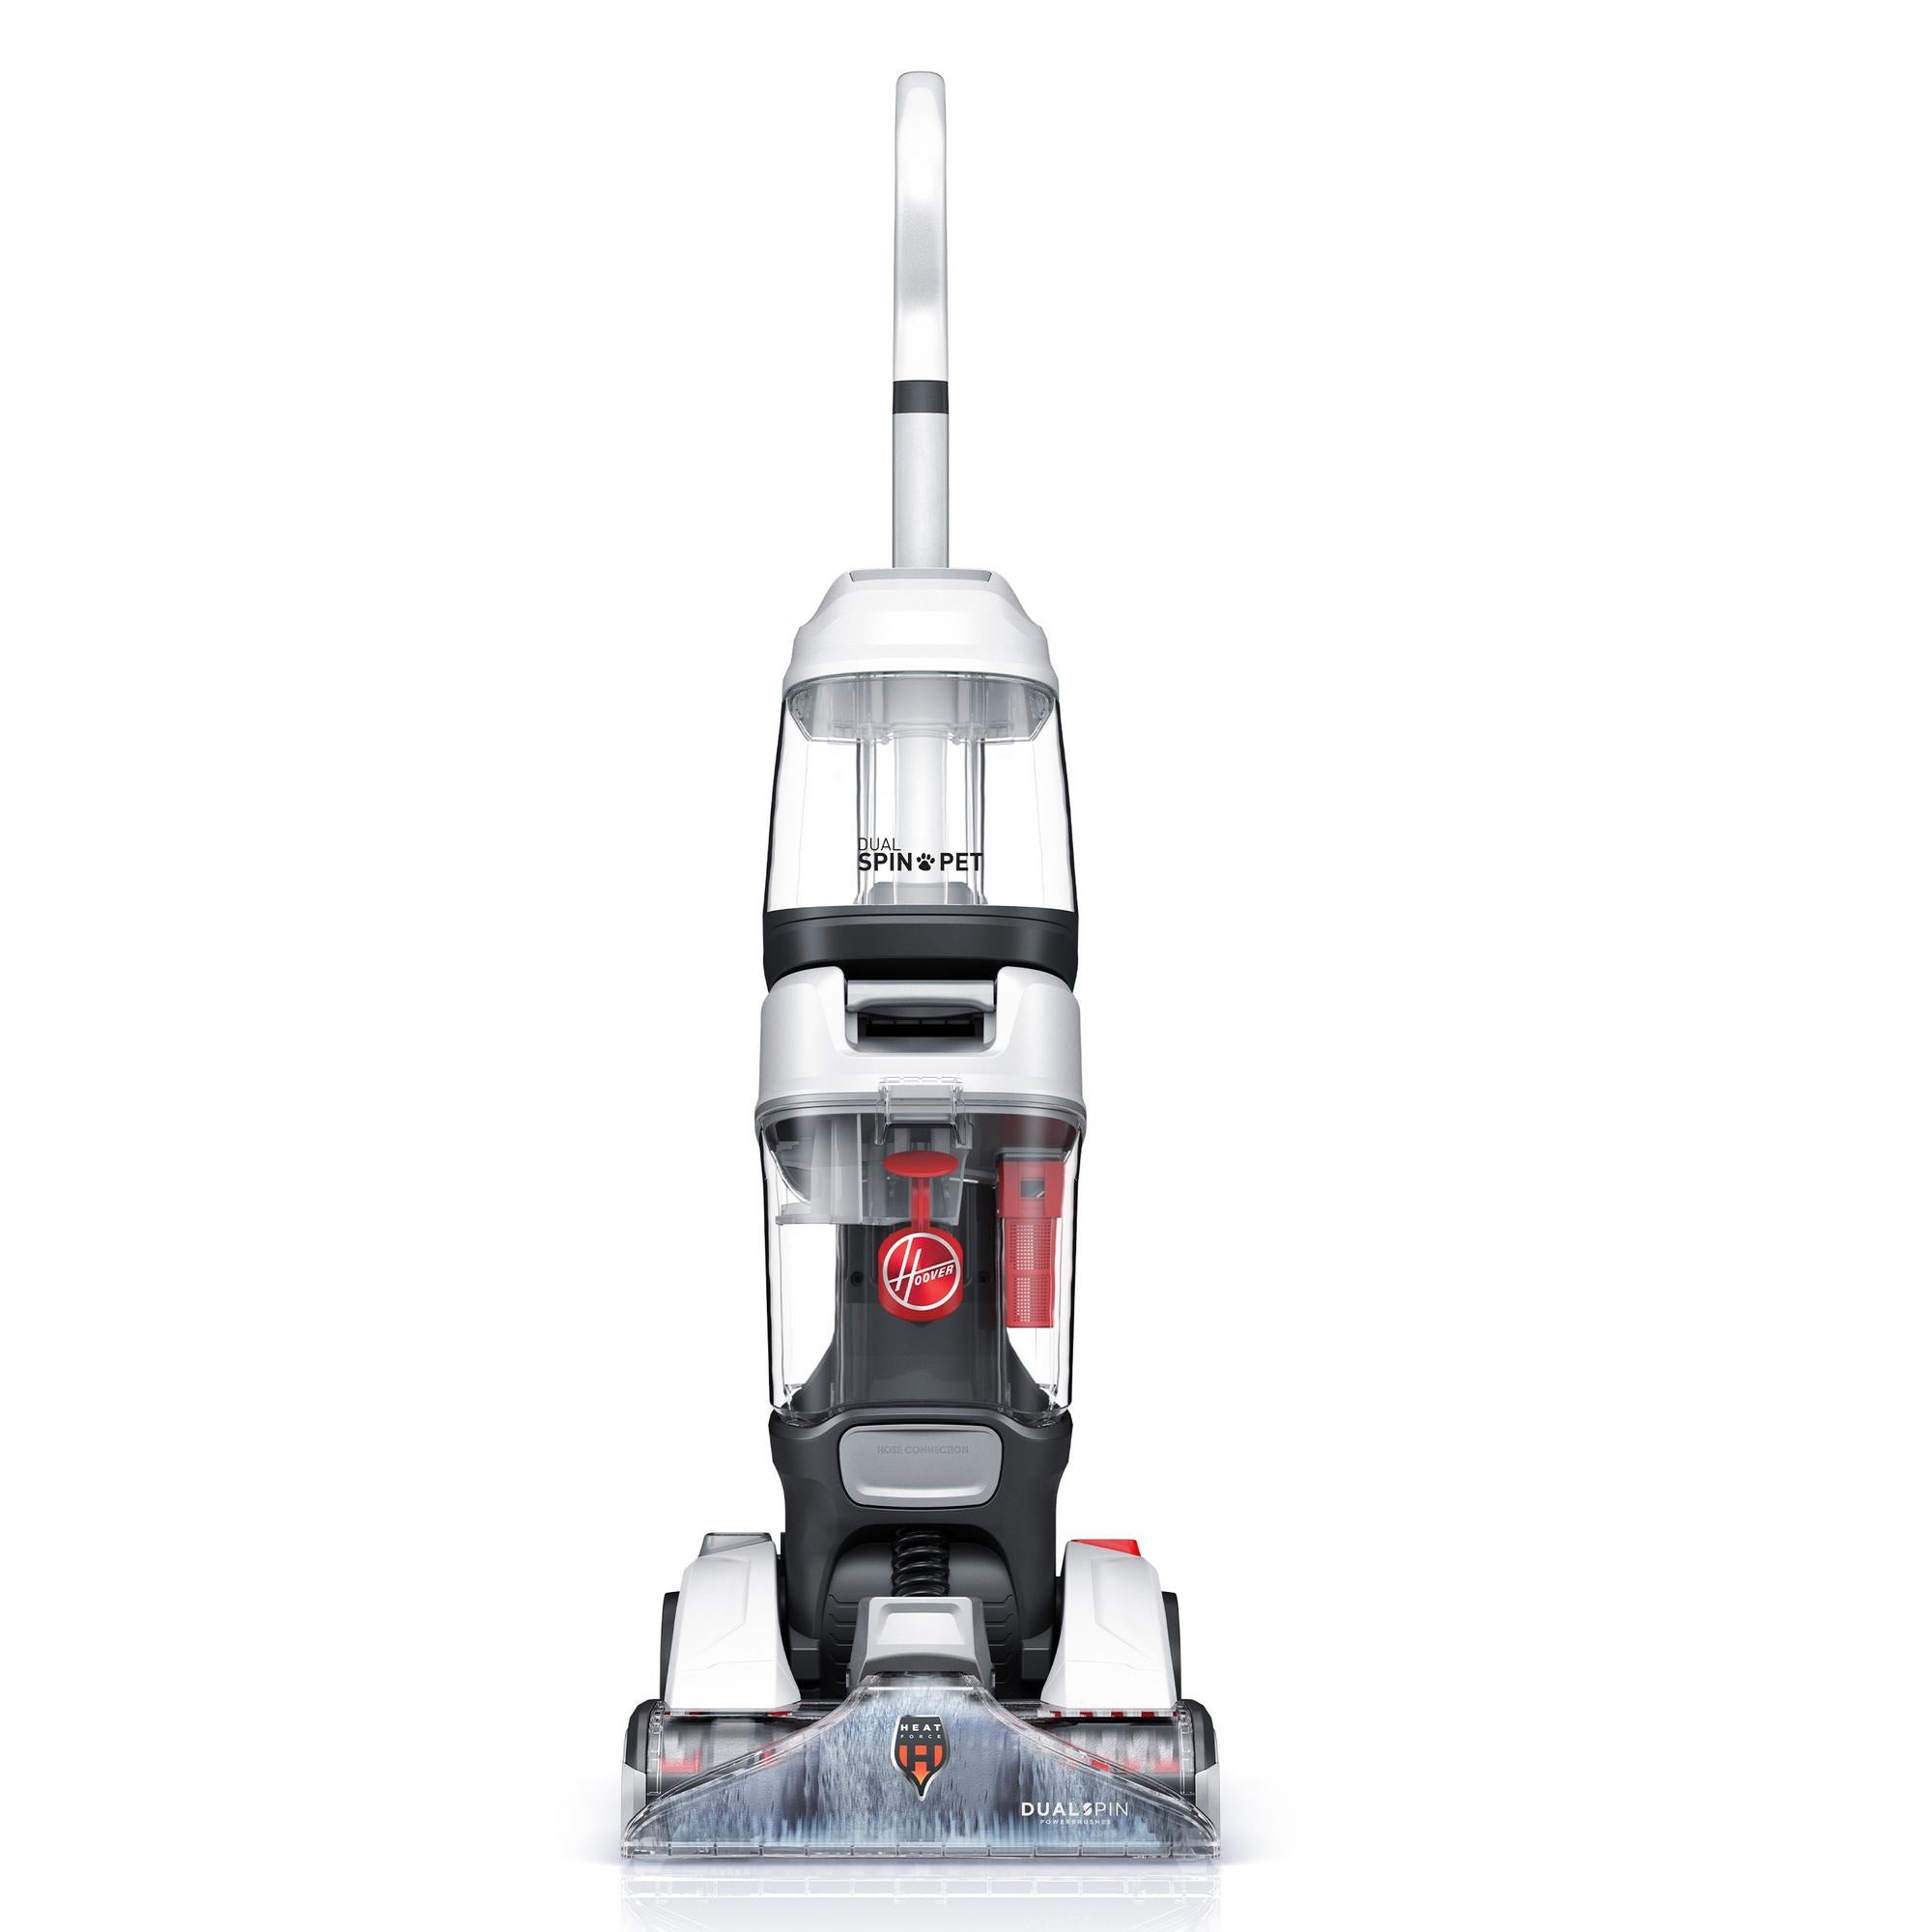 Portable Carpet Cleaner Extractor Cleaning Vacuum Machine -  Powerful/Lightweight/Perfect for Mobile Auto Detailing | Car  Detail/Upholstery/Home/Clean